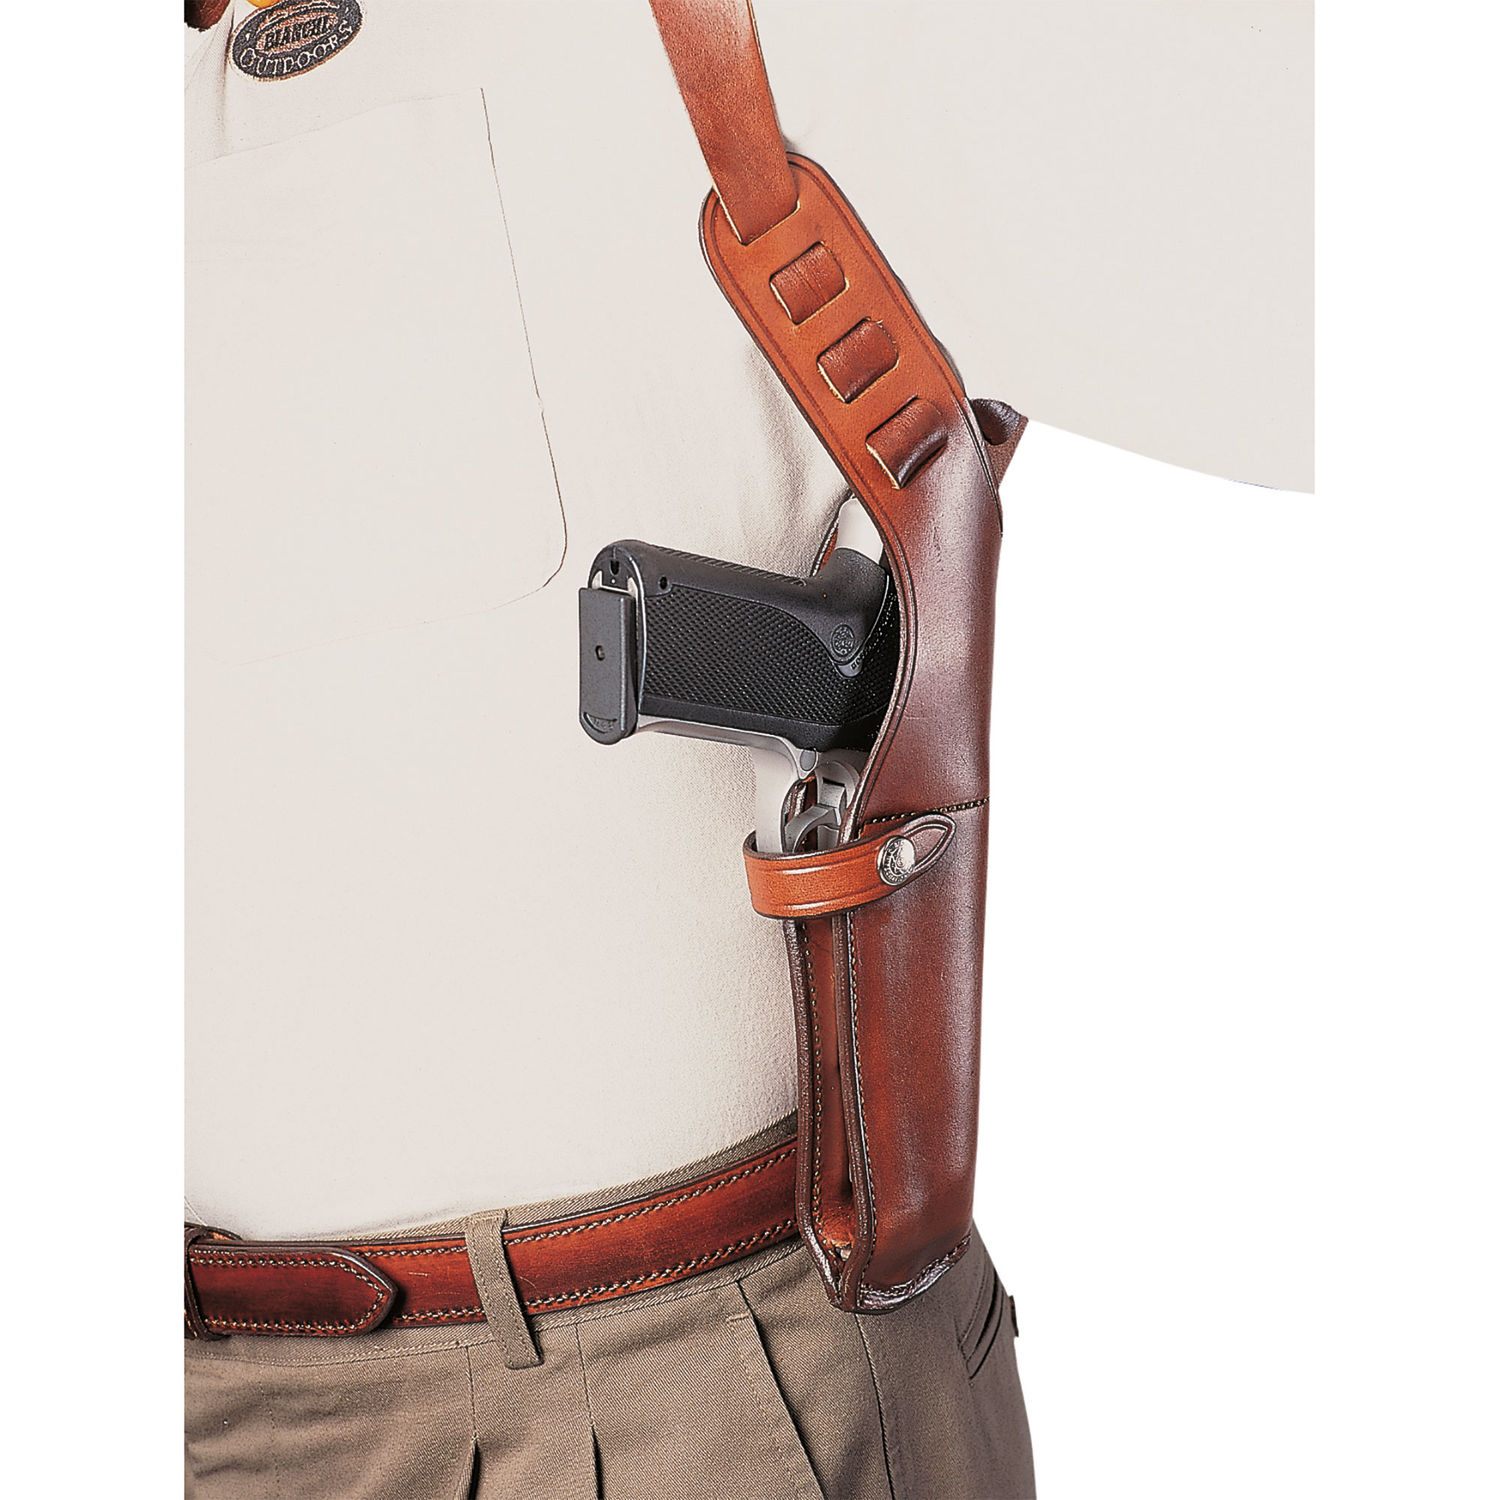 Concealable Holsters